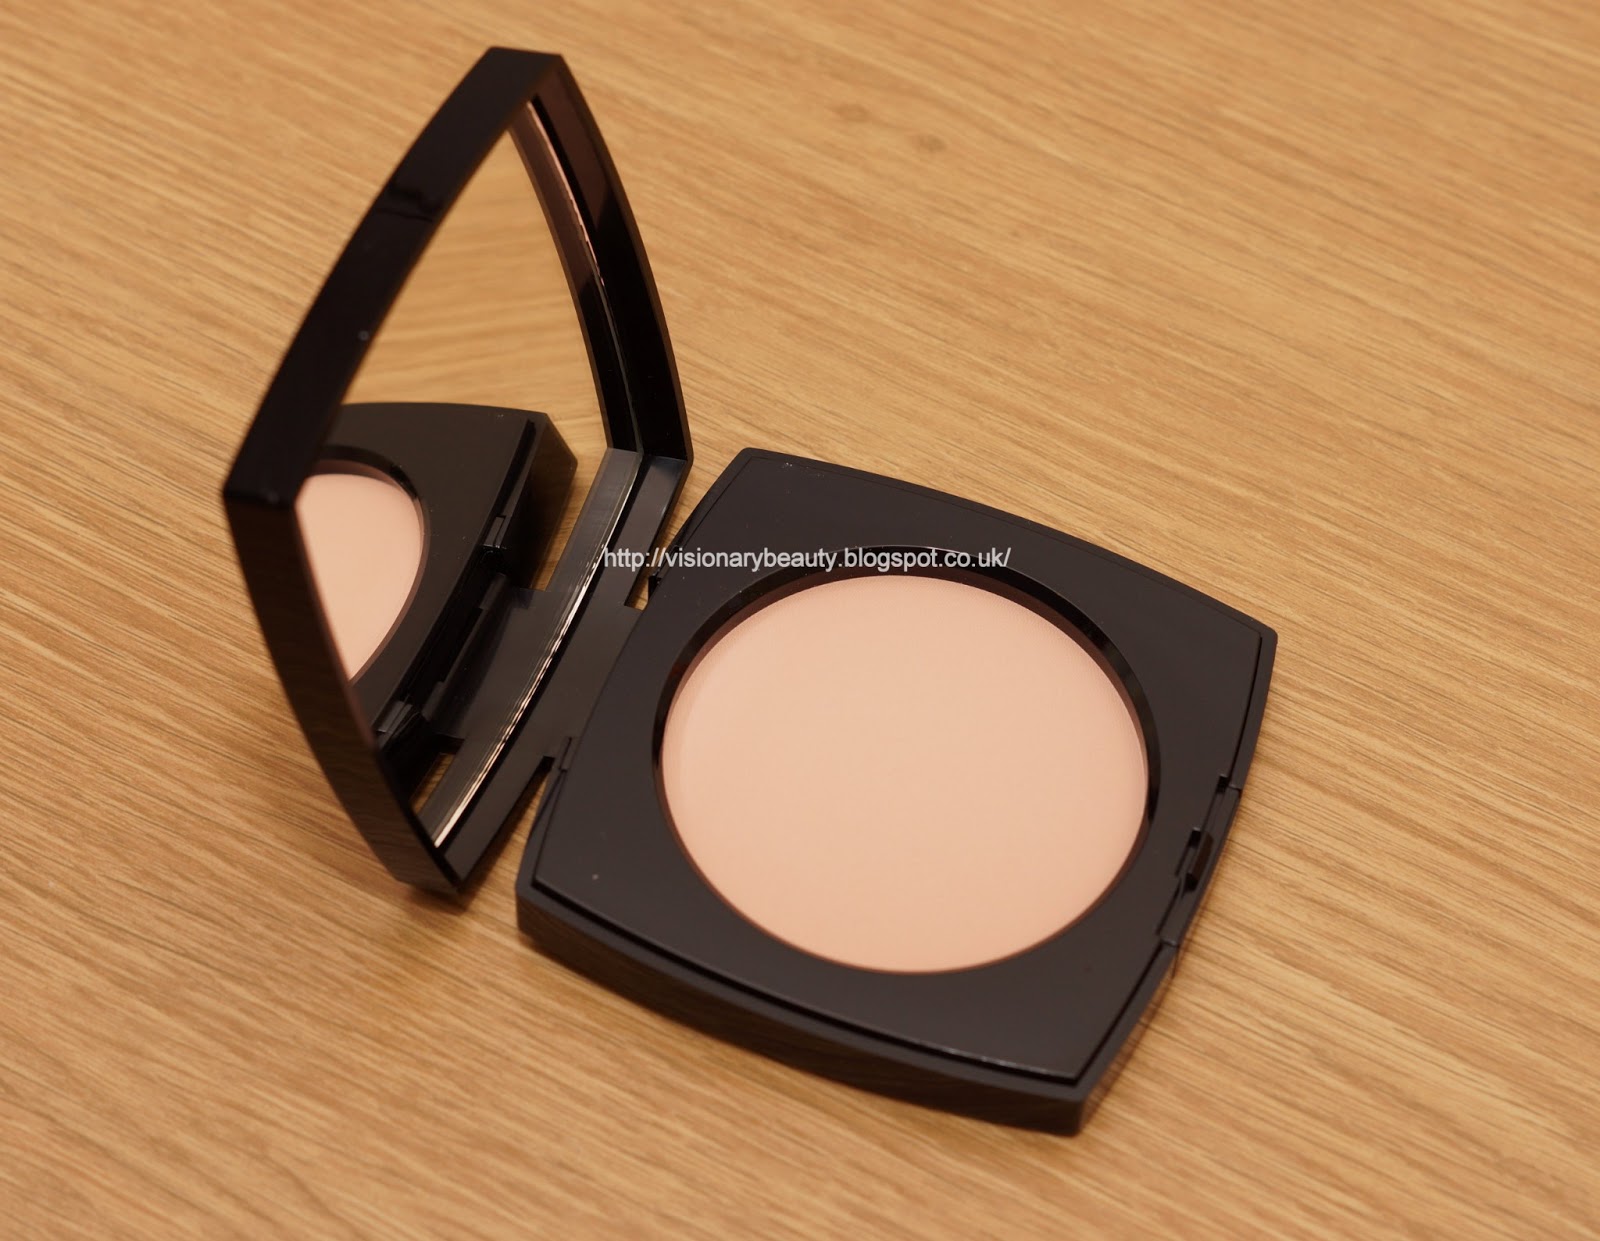 Visionary Beauty: CHANEL Les Beiges Healthy Glow Sheer Powder